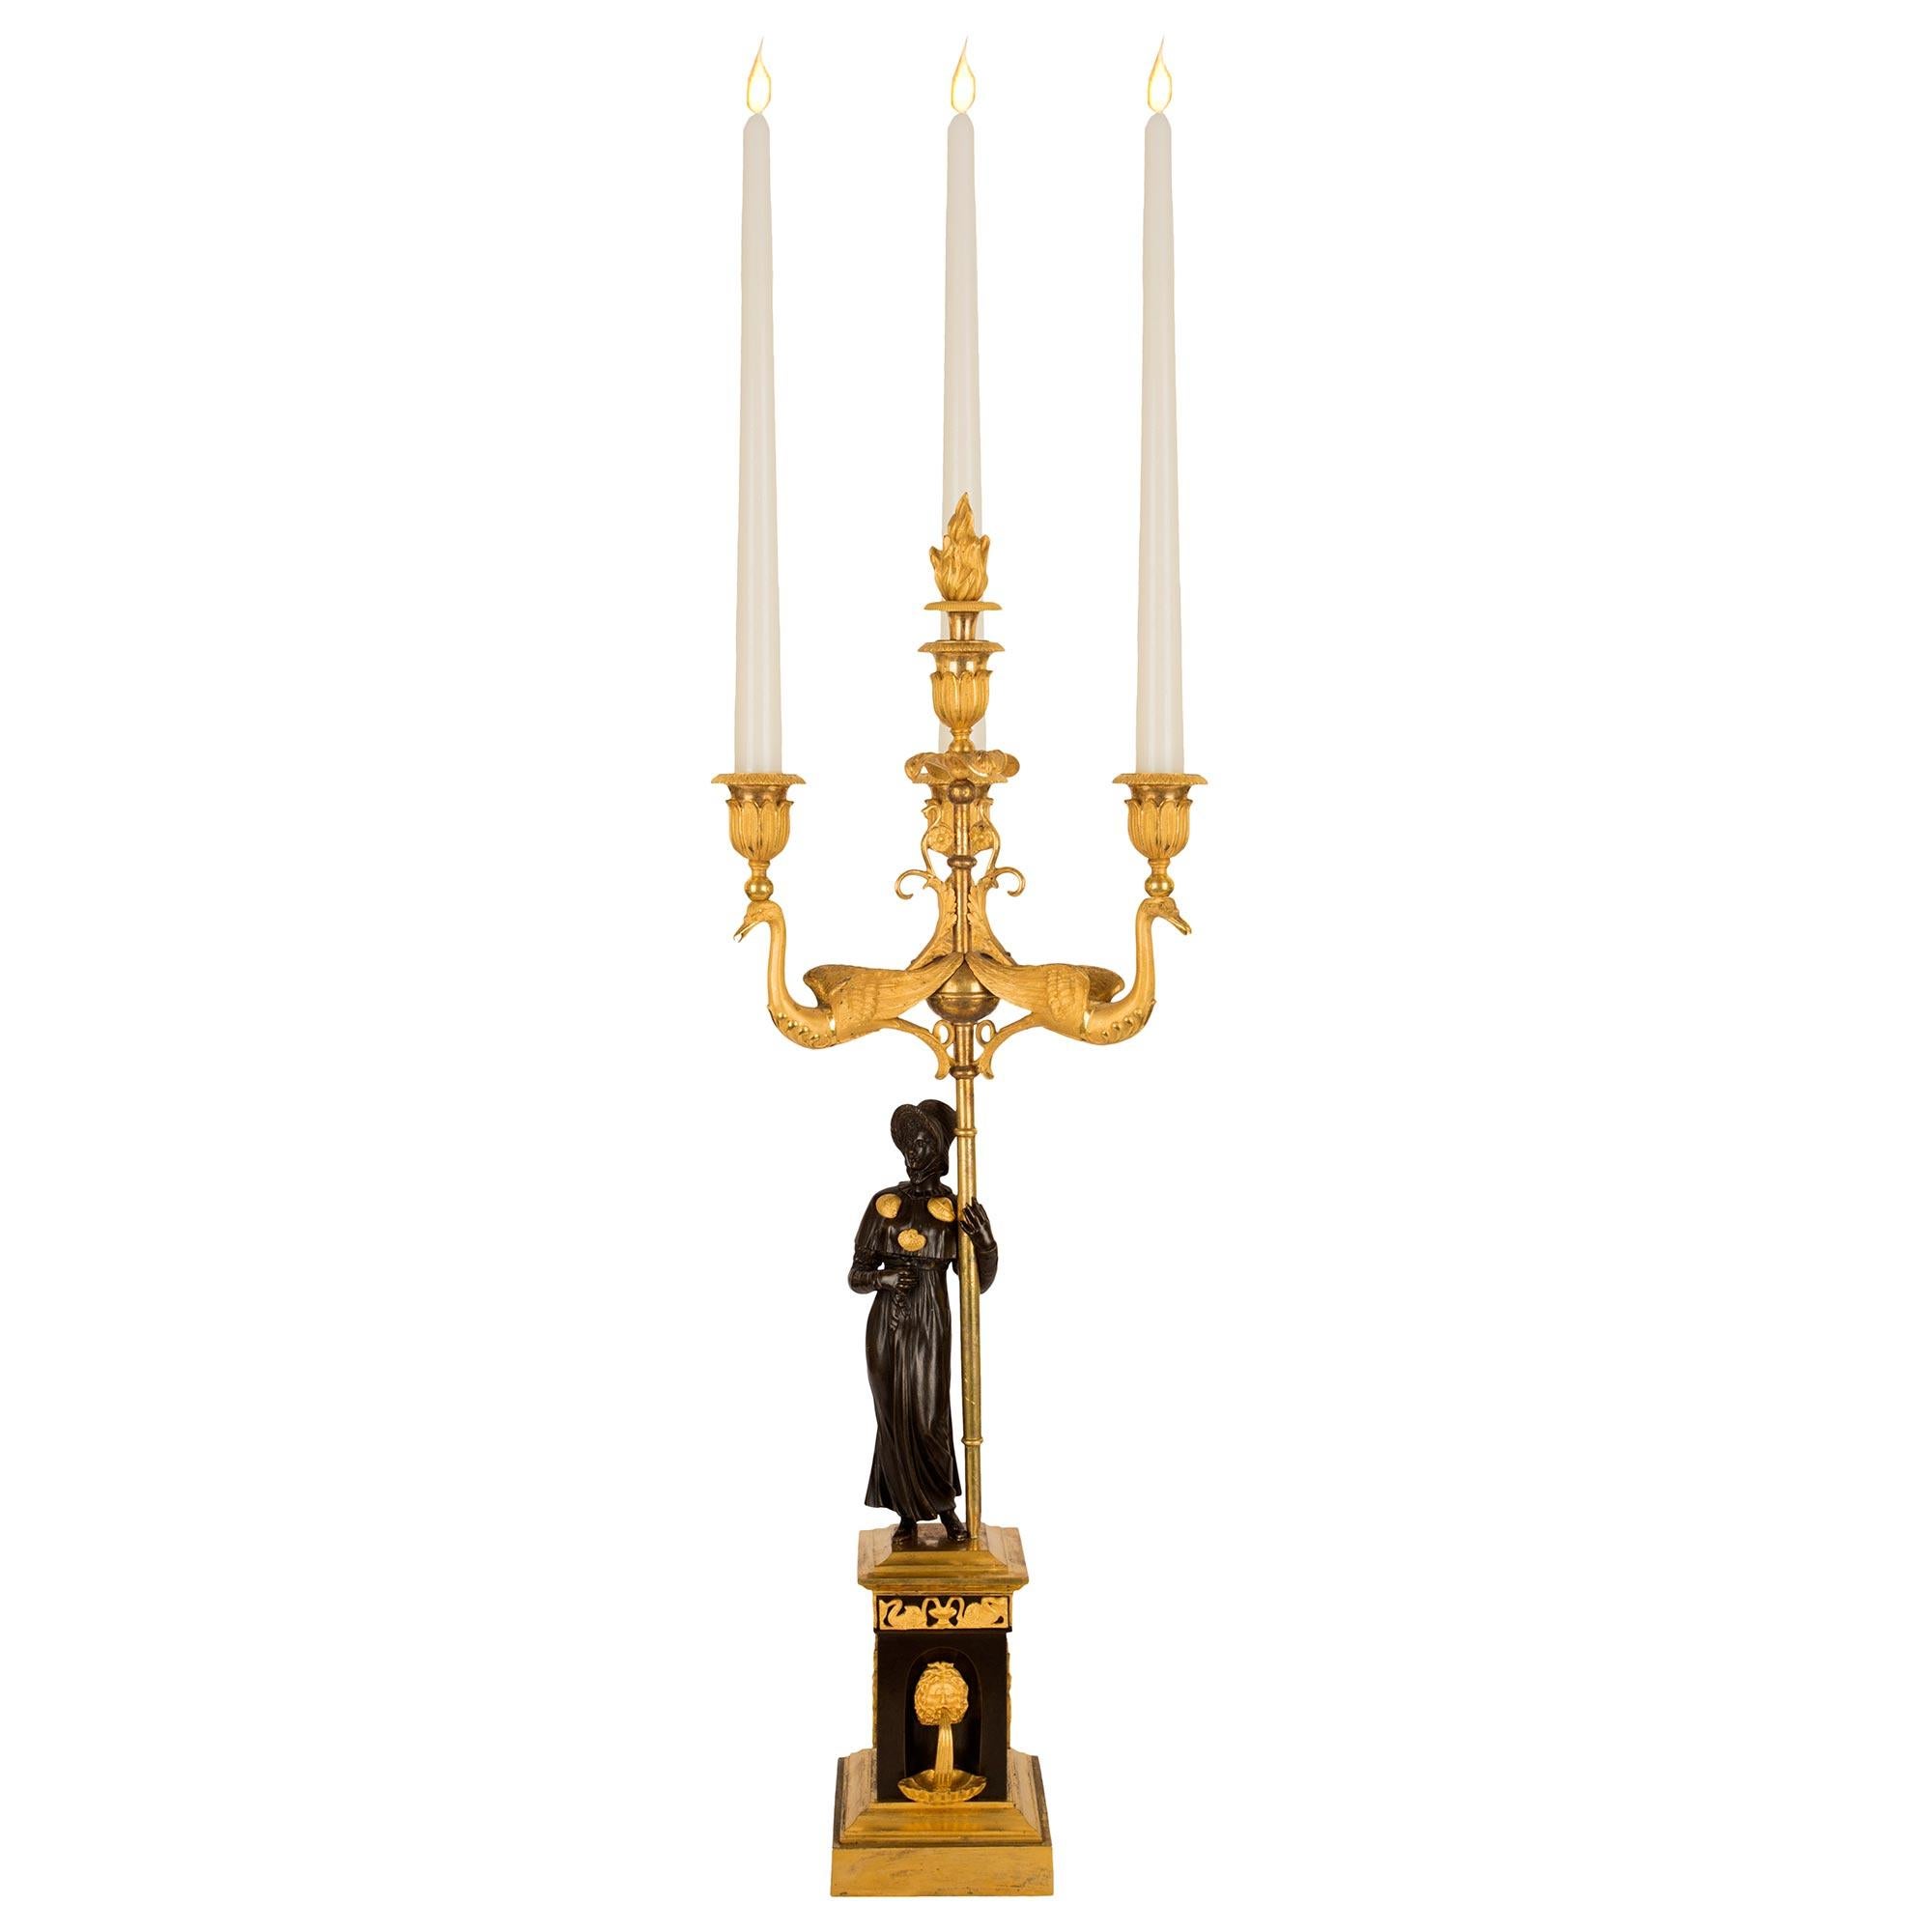 19th Century Pair of French 1st Empire Period Bronze and Ormolu Three-Light Candelabras For Sale